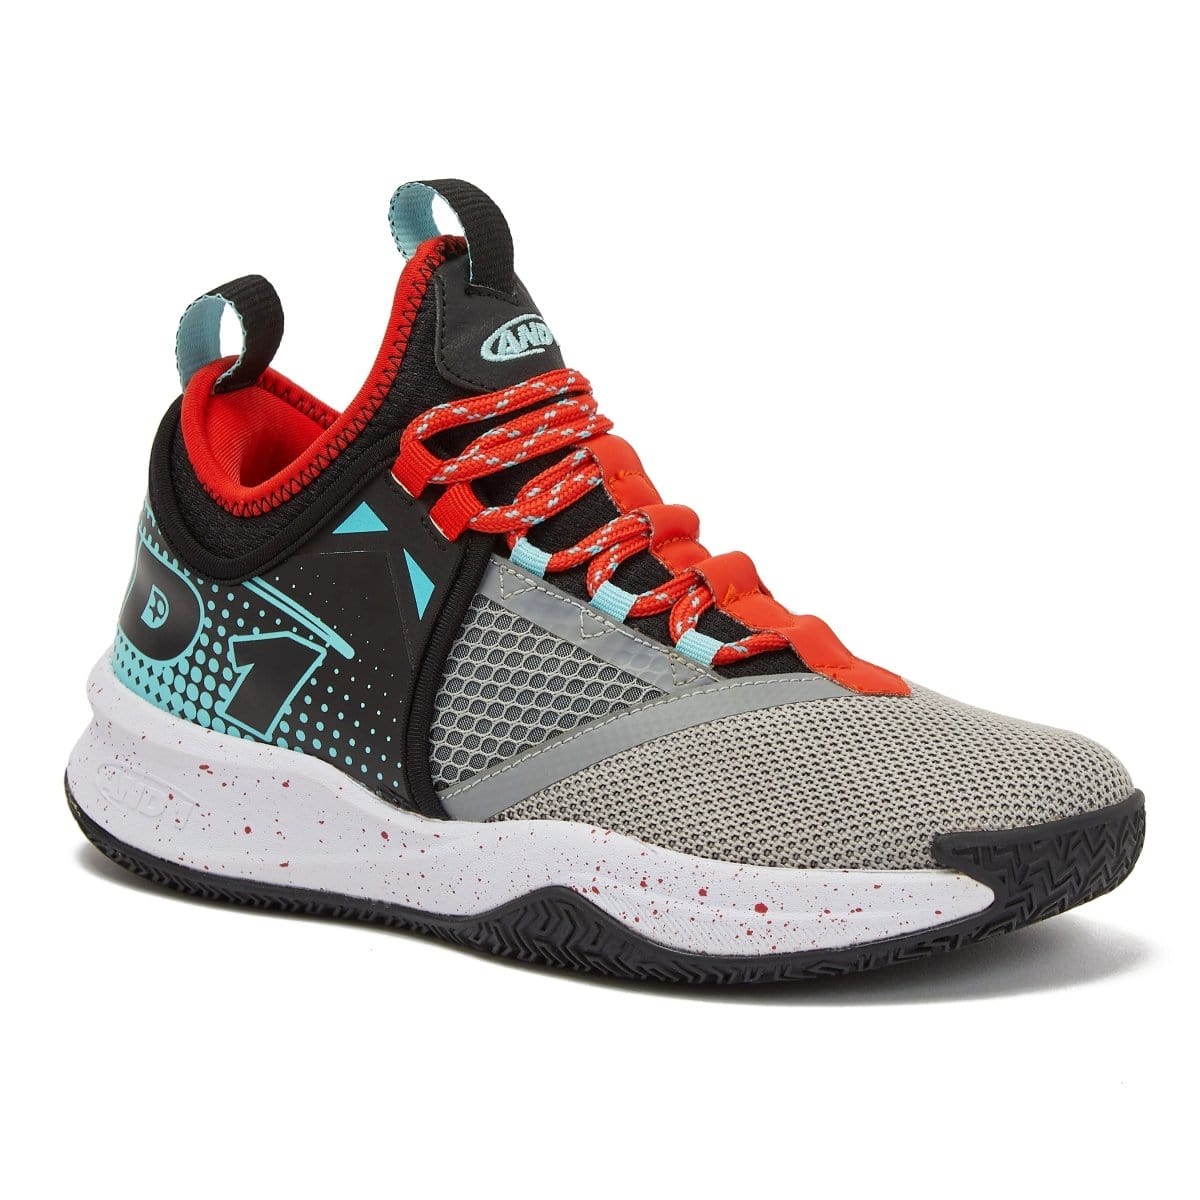 AND-1 AND-1 JUNIOR CHARGE GREY BASKETBALL SHOES - INSPORT